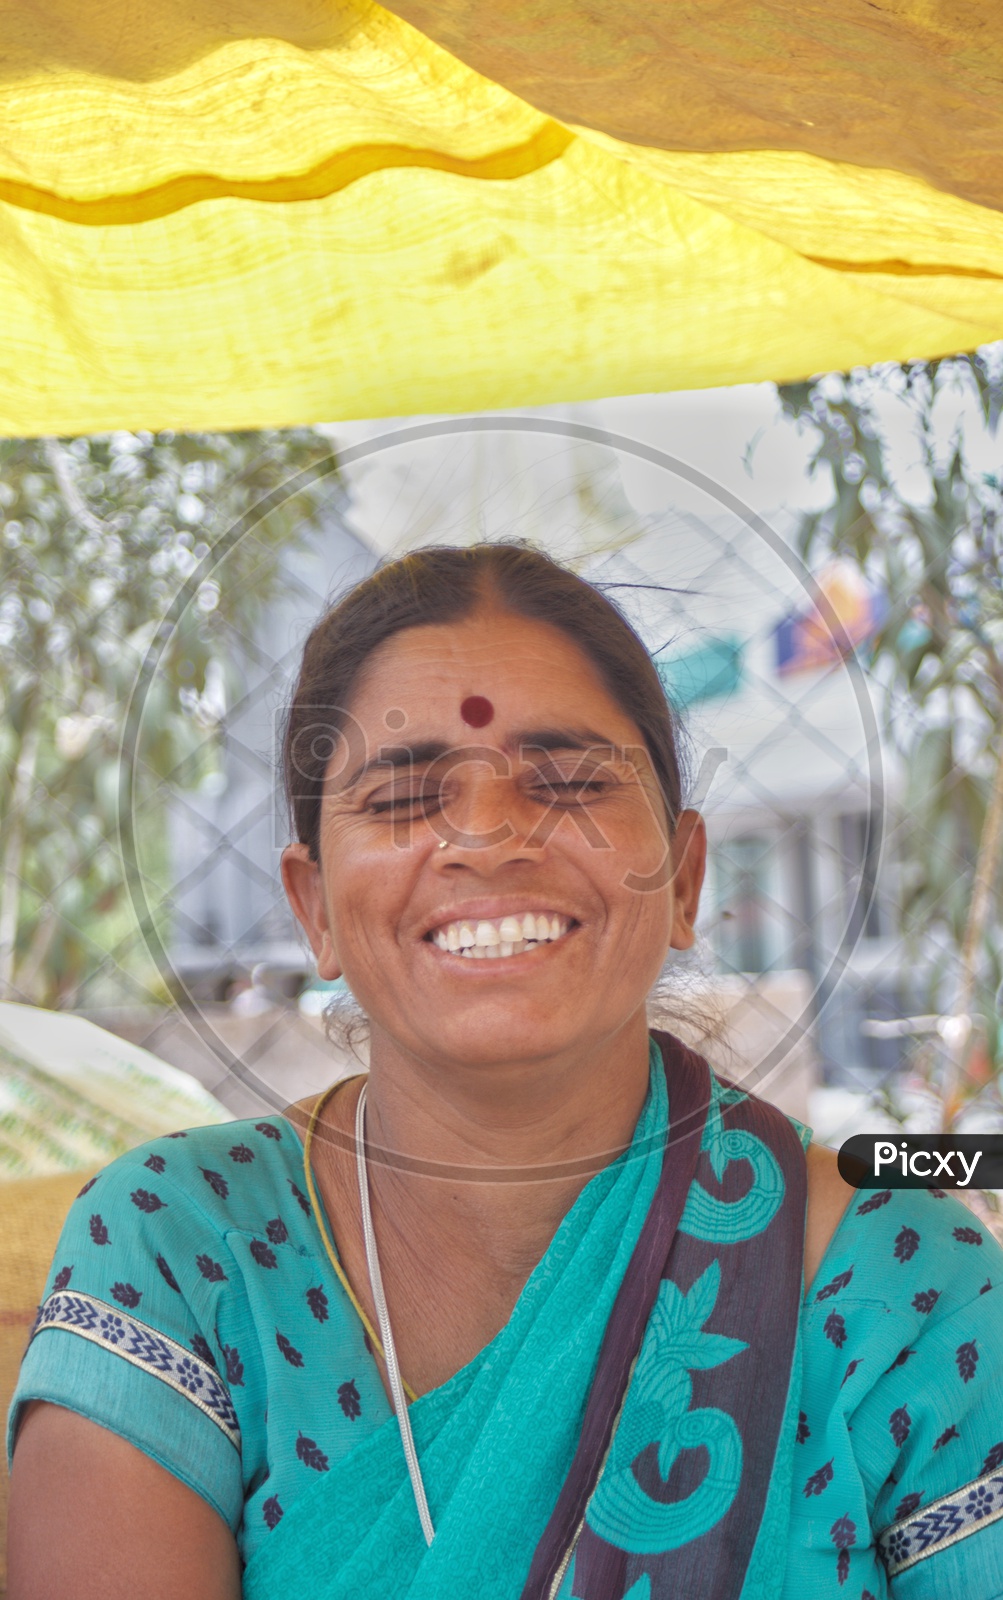 Portrait Of an Woman Vendor With Smile Face In a Market